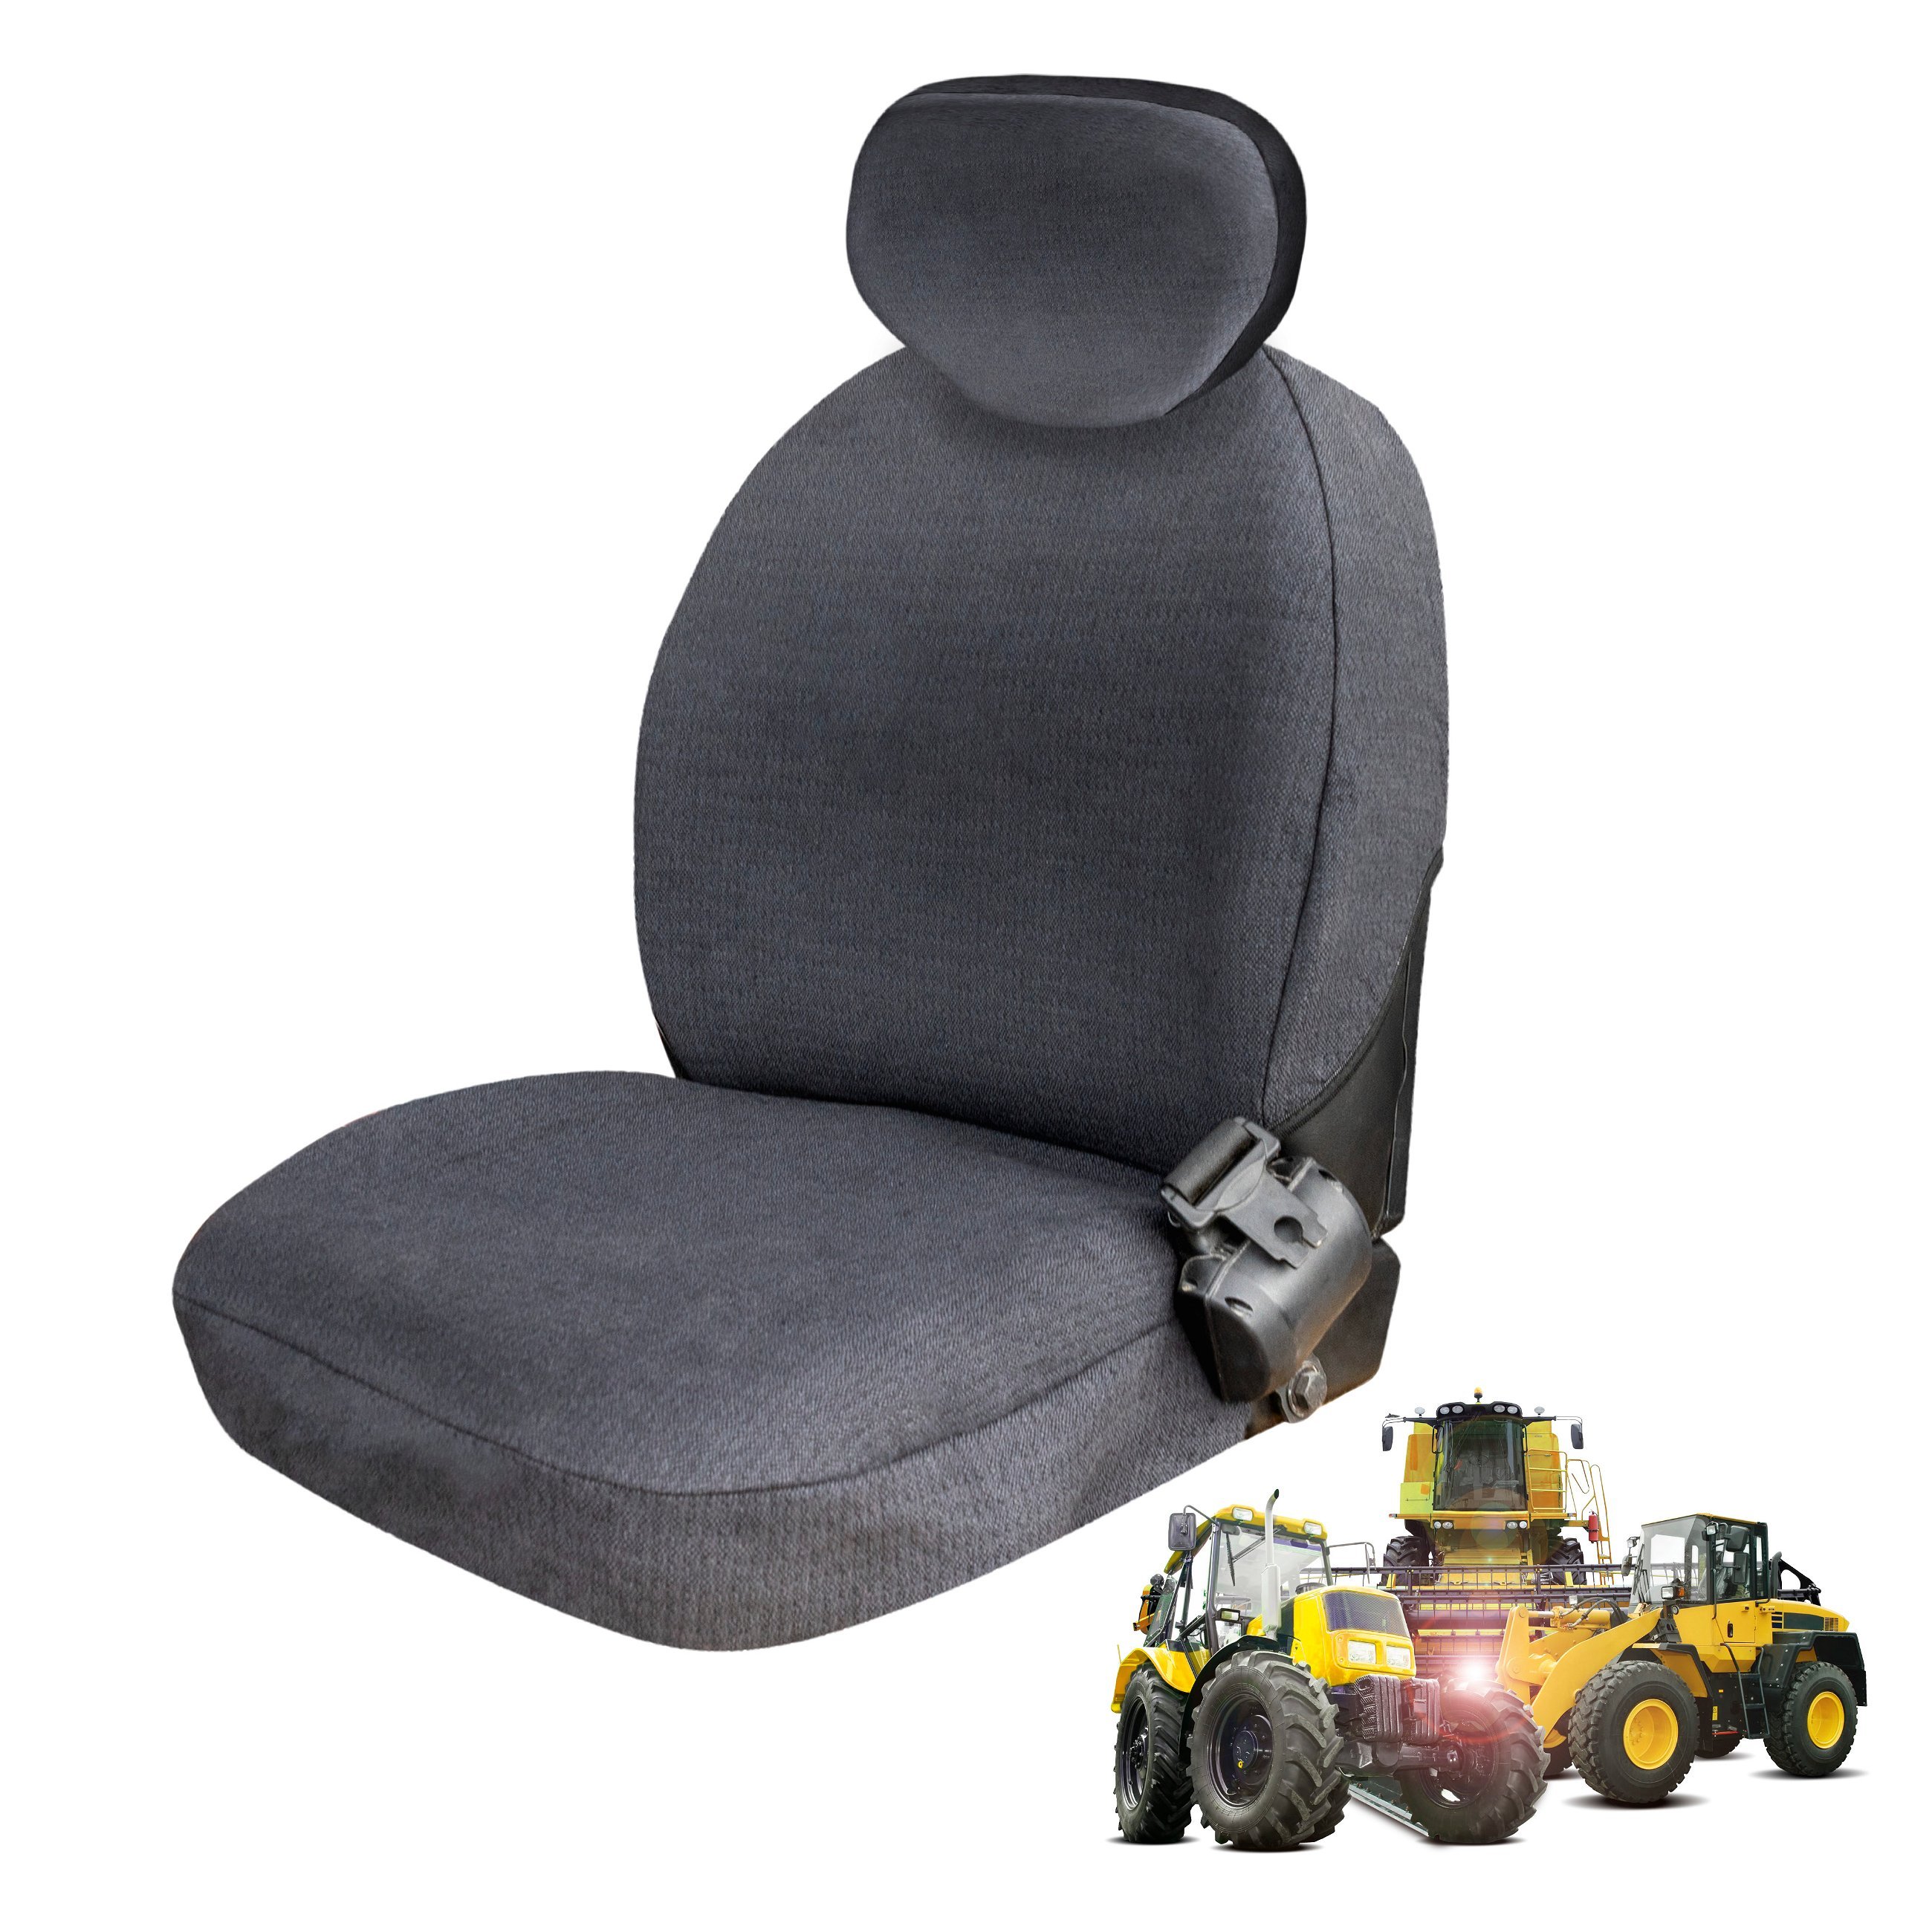 Seat cover large construction machinery, combine harvesters, choppers, size 9